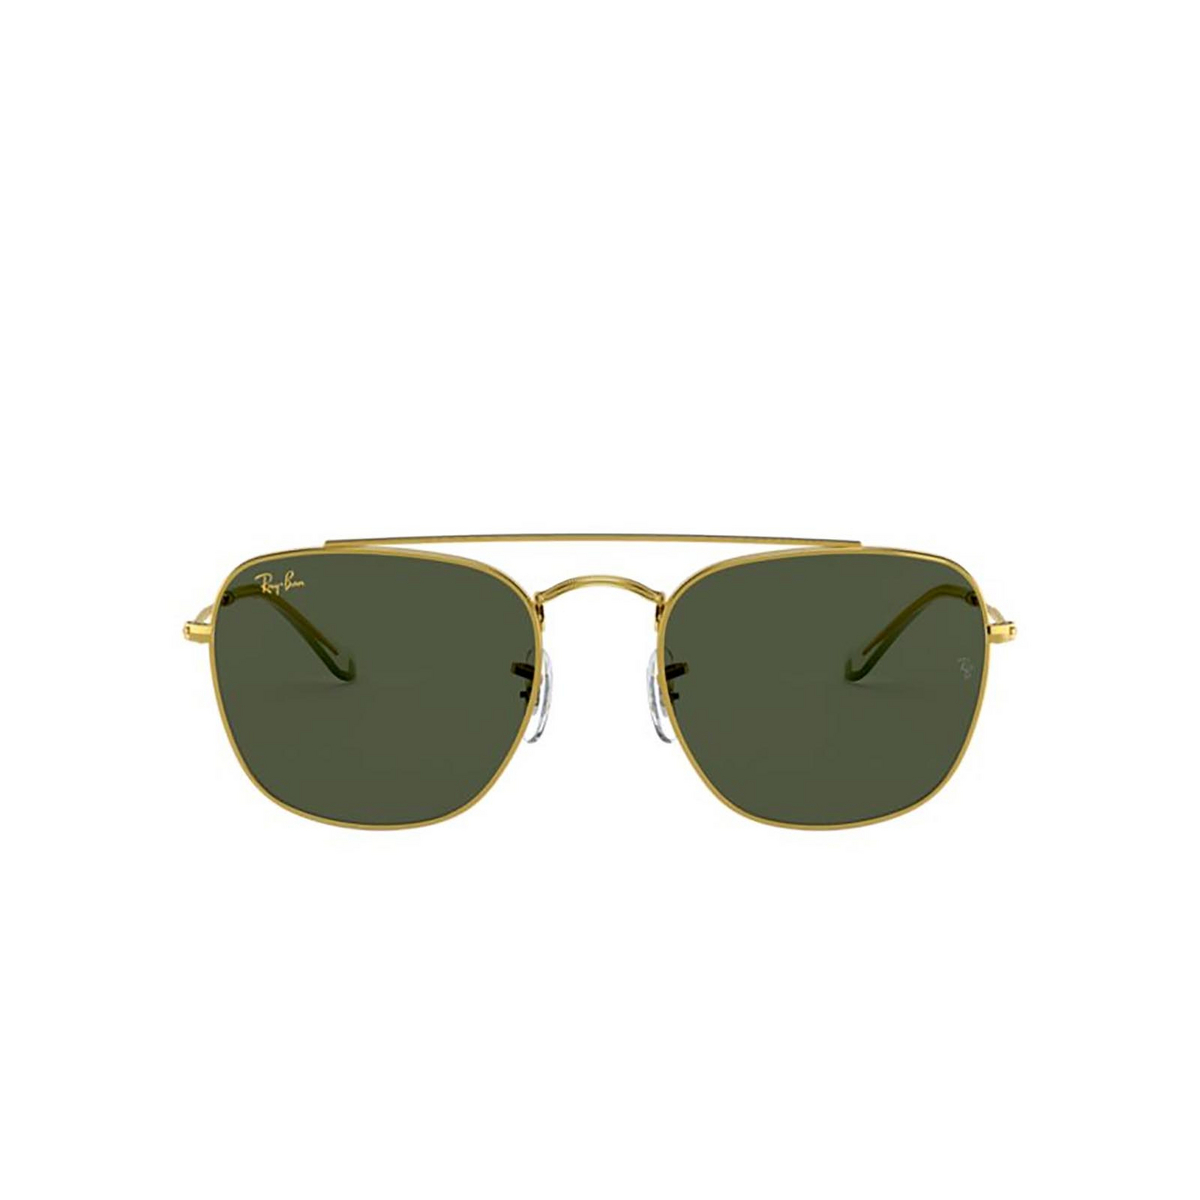 Ray-Ban RB3557 Sunglasses 919631 LEGEND GOLD - front view